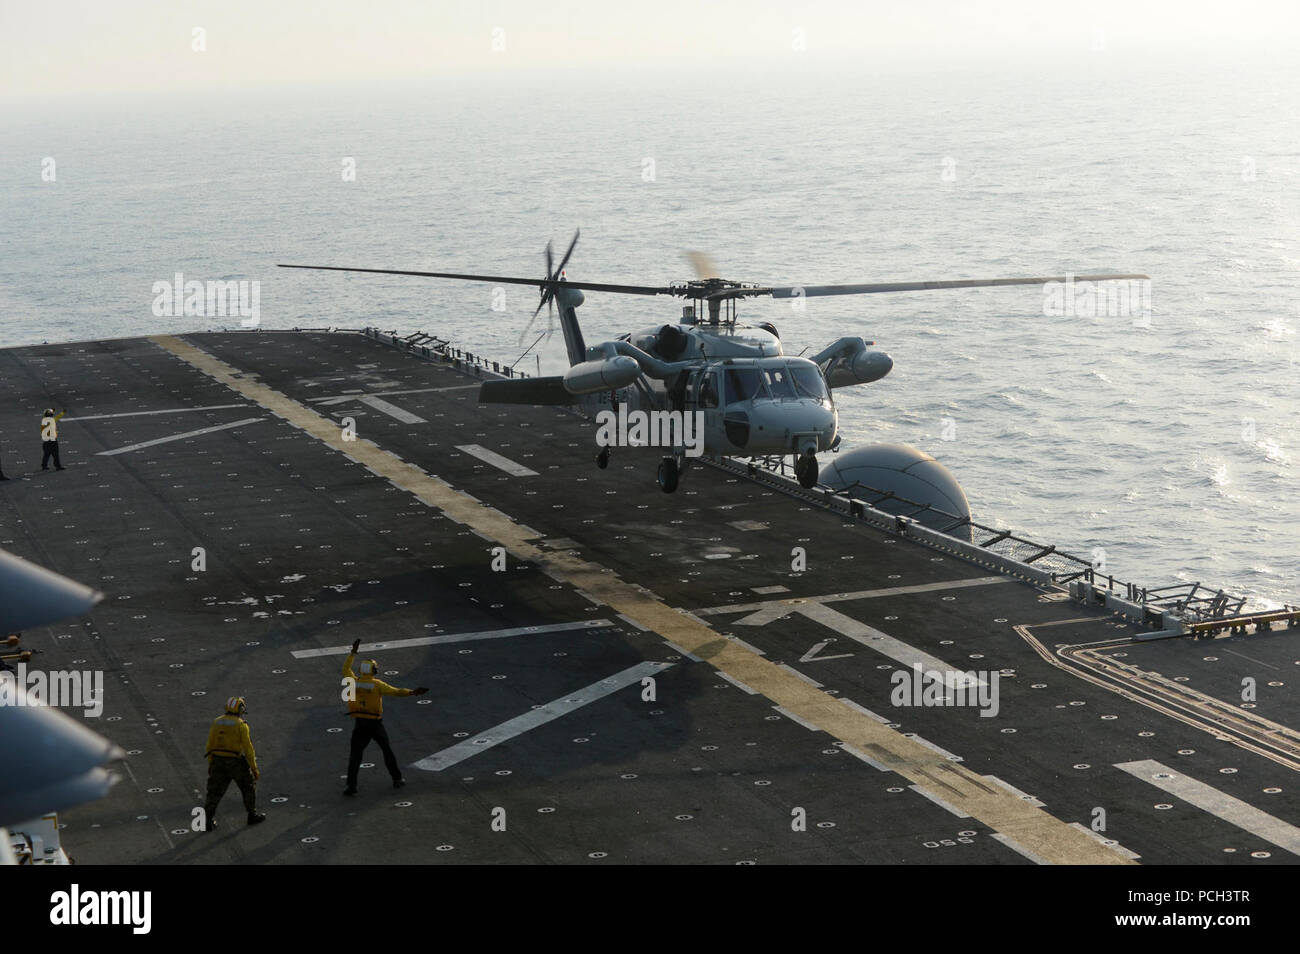 A South Korean navy helicopter lands on the flight deck of the amphibious assault ship USS Bonhomme Richard (LHD 6) in the East China Sea during deck landing qualifications as part of Ssang Yong 14 during Marine Expeditionary Force Exercise (MEFEX) 2014 March 27, 2014. The Bonhomme Richard Amphibious Ready Group participated in MEFEX 2014, a U.S. Marine Corps Forces Pacific-sponsored series of exercises between the U.S. Navy and Marine Corps and South Korean forces. Among the exercises were the Korea Marine Exercise Program, Freedom Banner 14, Ssang Yong 14, Key Resolve 14 and the Combined Mar Stock Photo